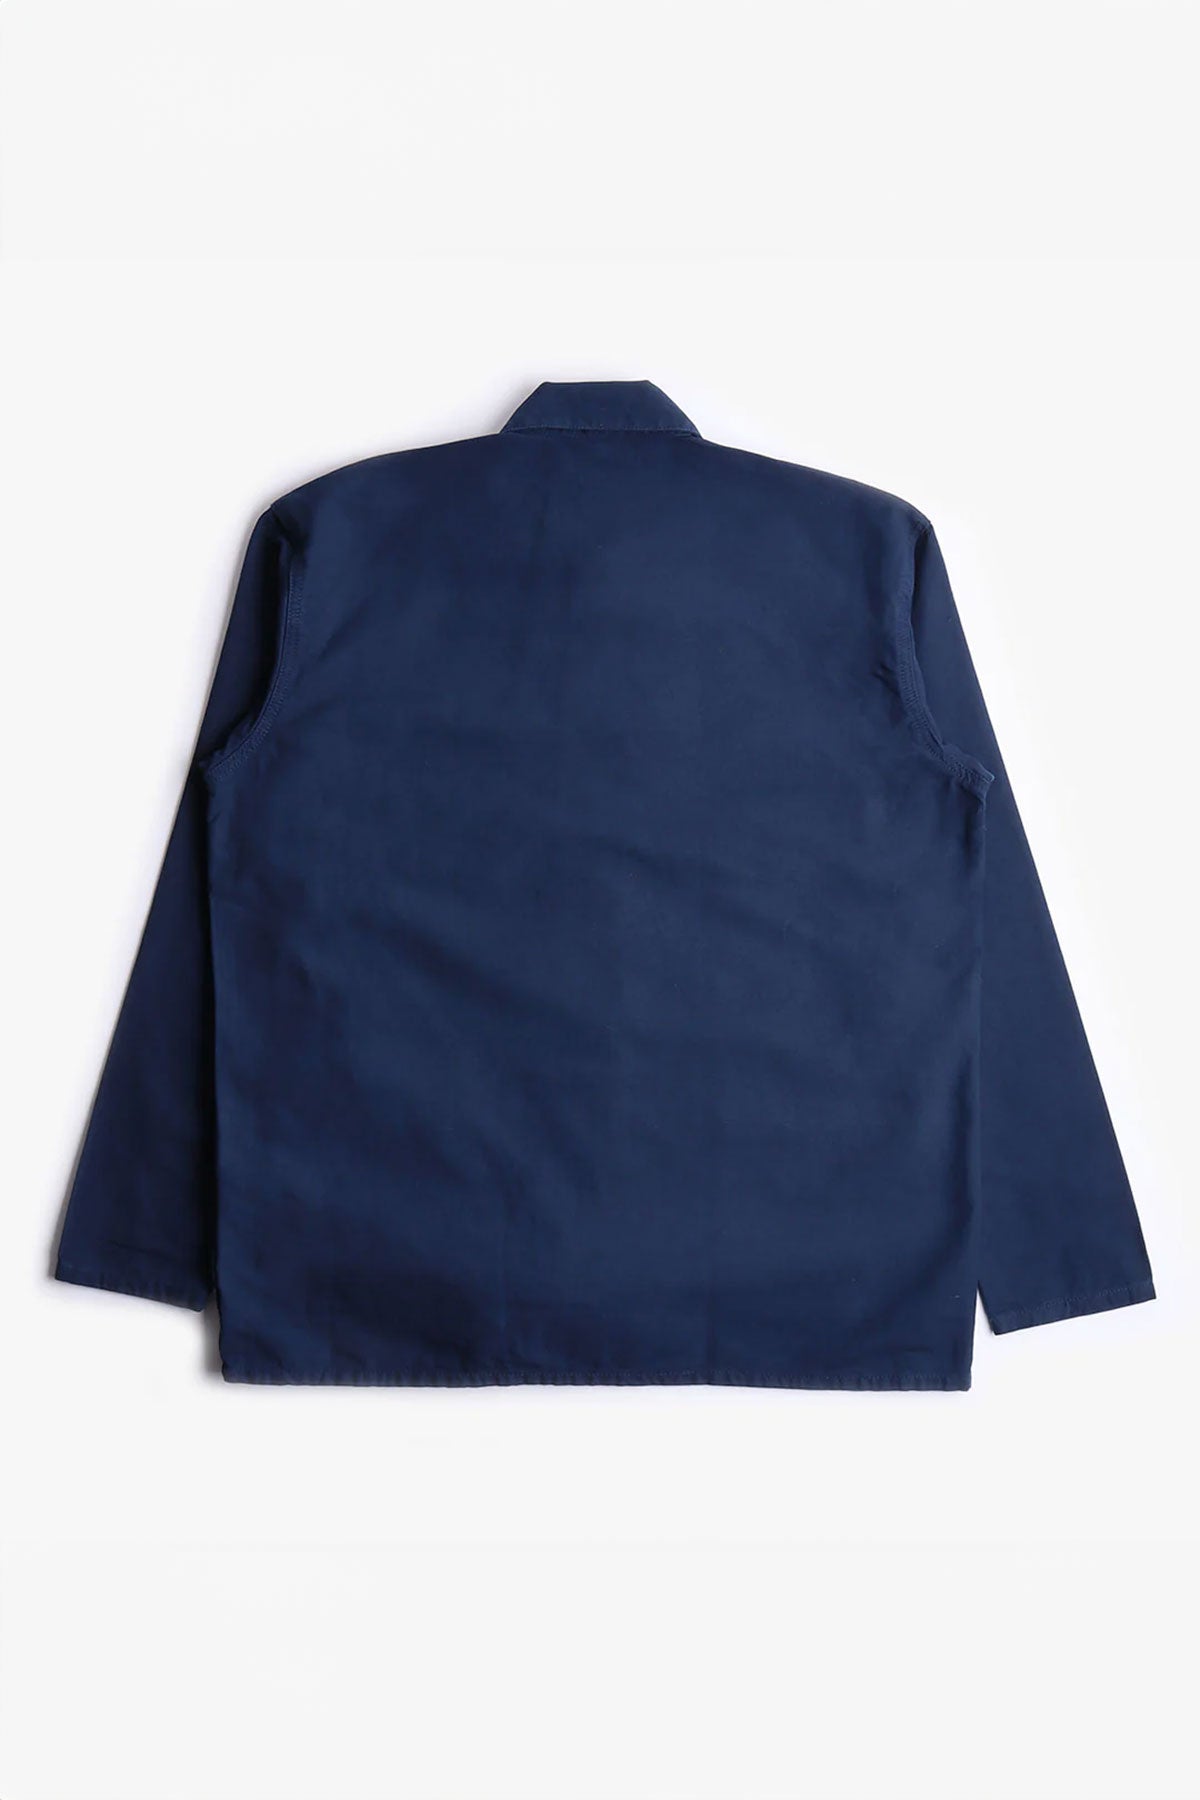 Service Works - Classic Coverall Jacket  in Navy